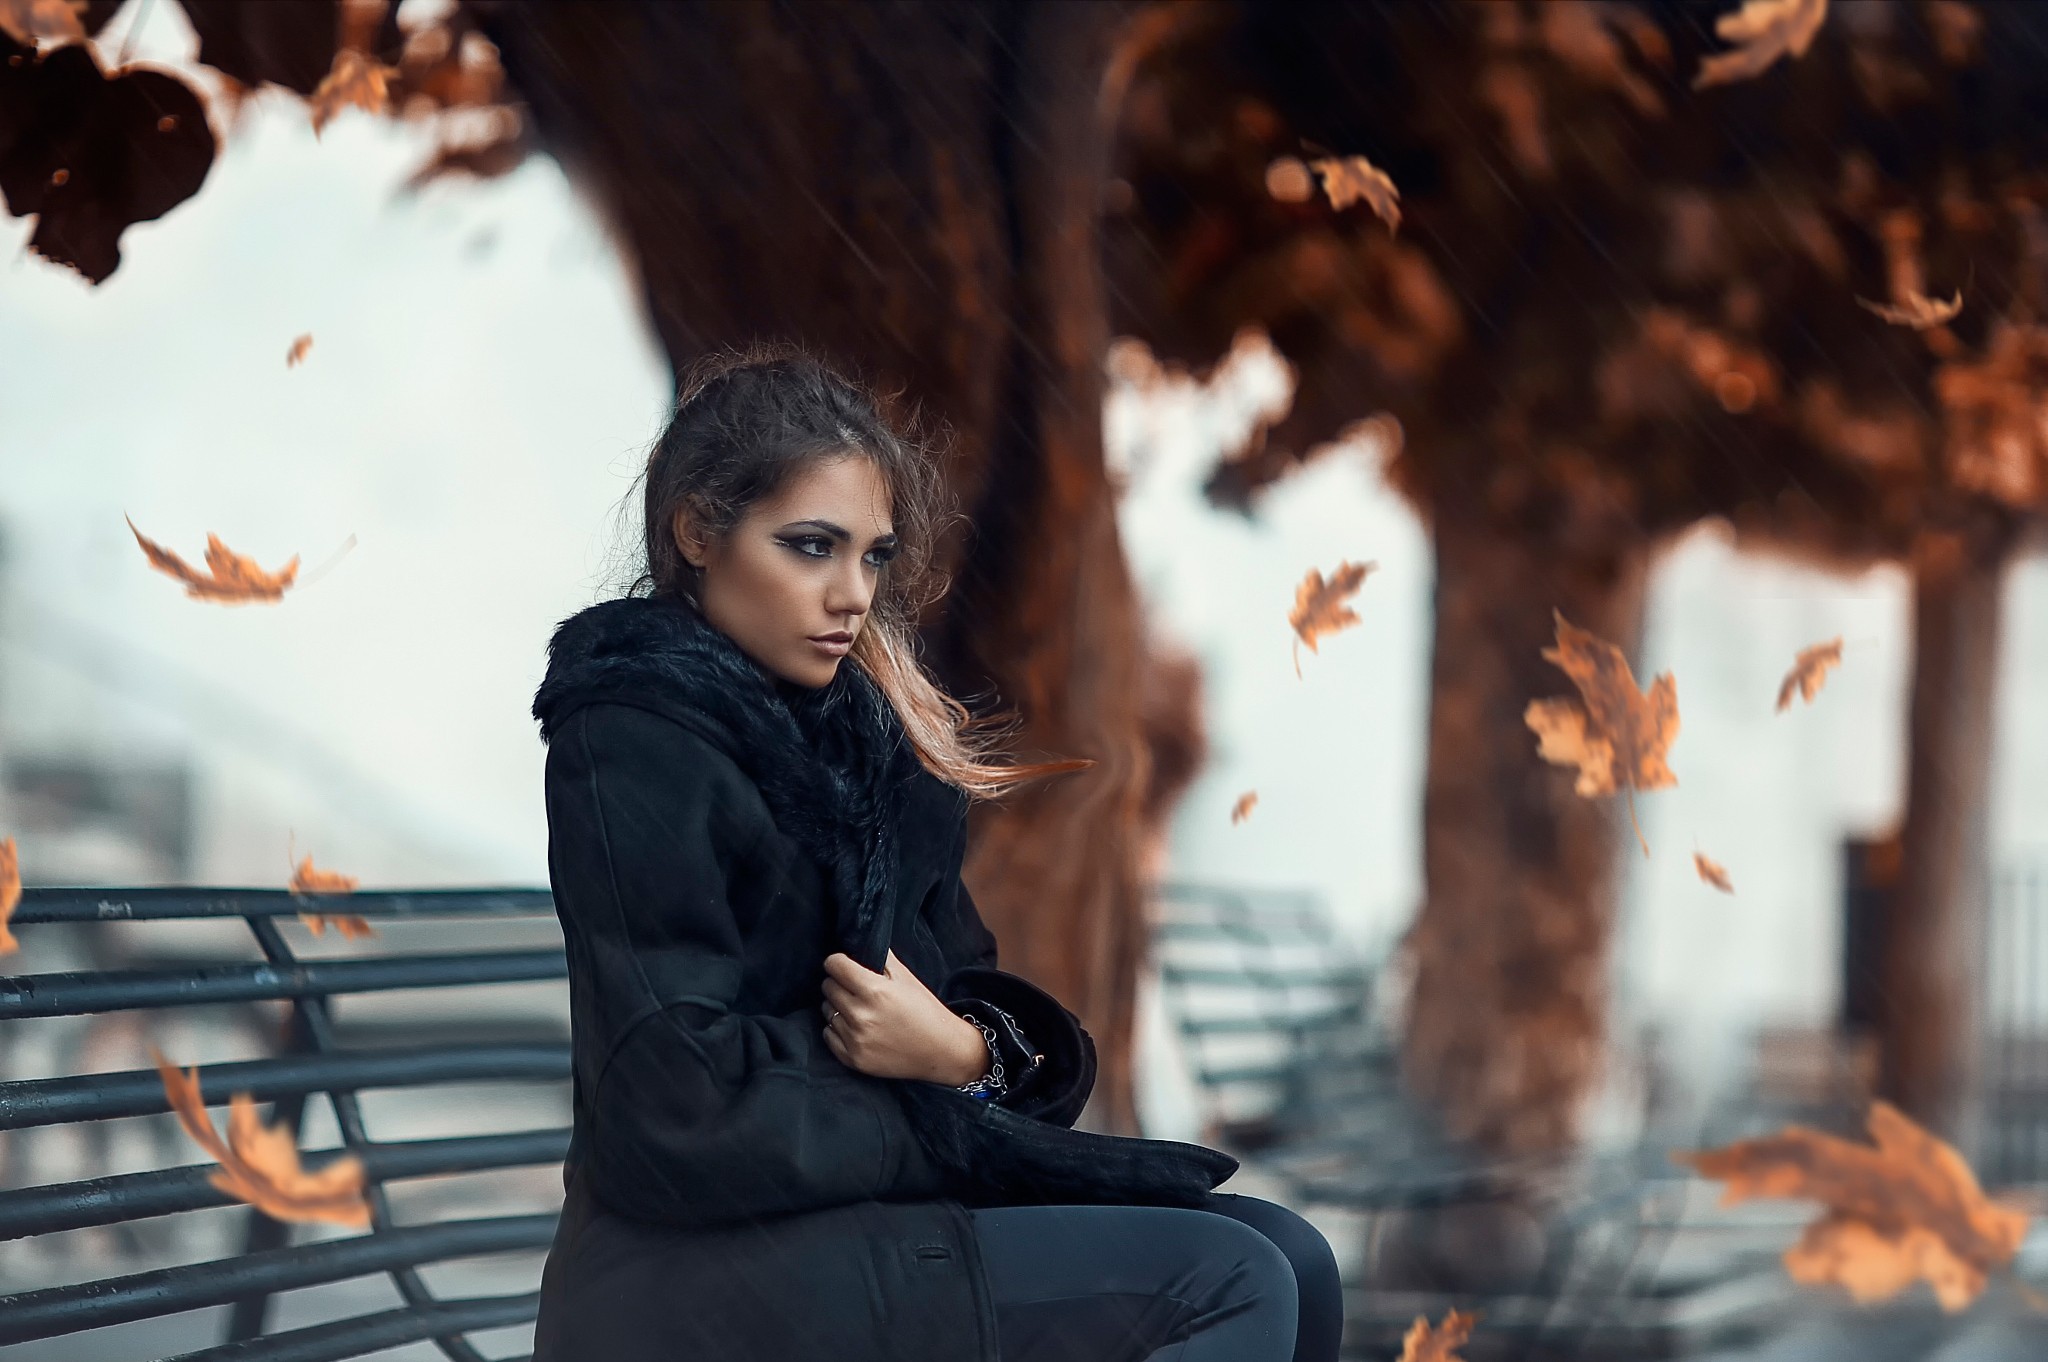 People 2048x1362 women leaves bench women outdoors fall Alessandro Di Cicco black coat on bench Sweet Ary coats fallen leaves sitting park makeup eyeliner cold outdoors model autumn women